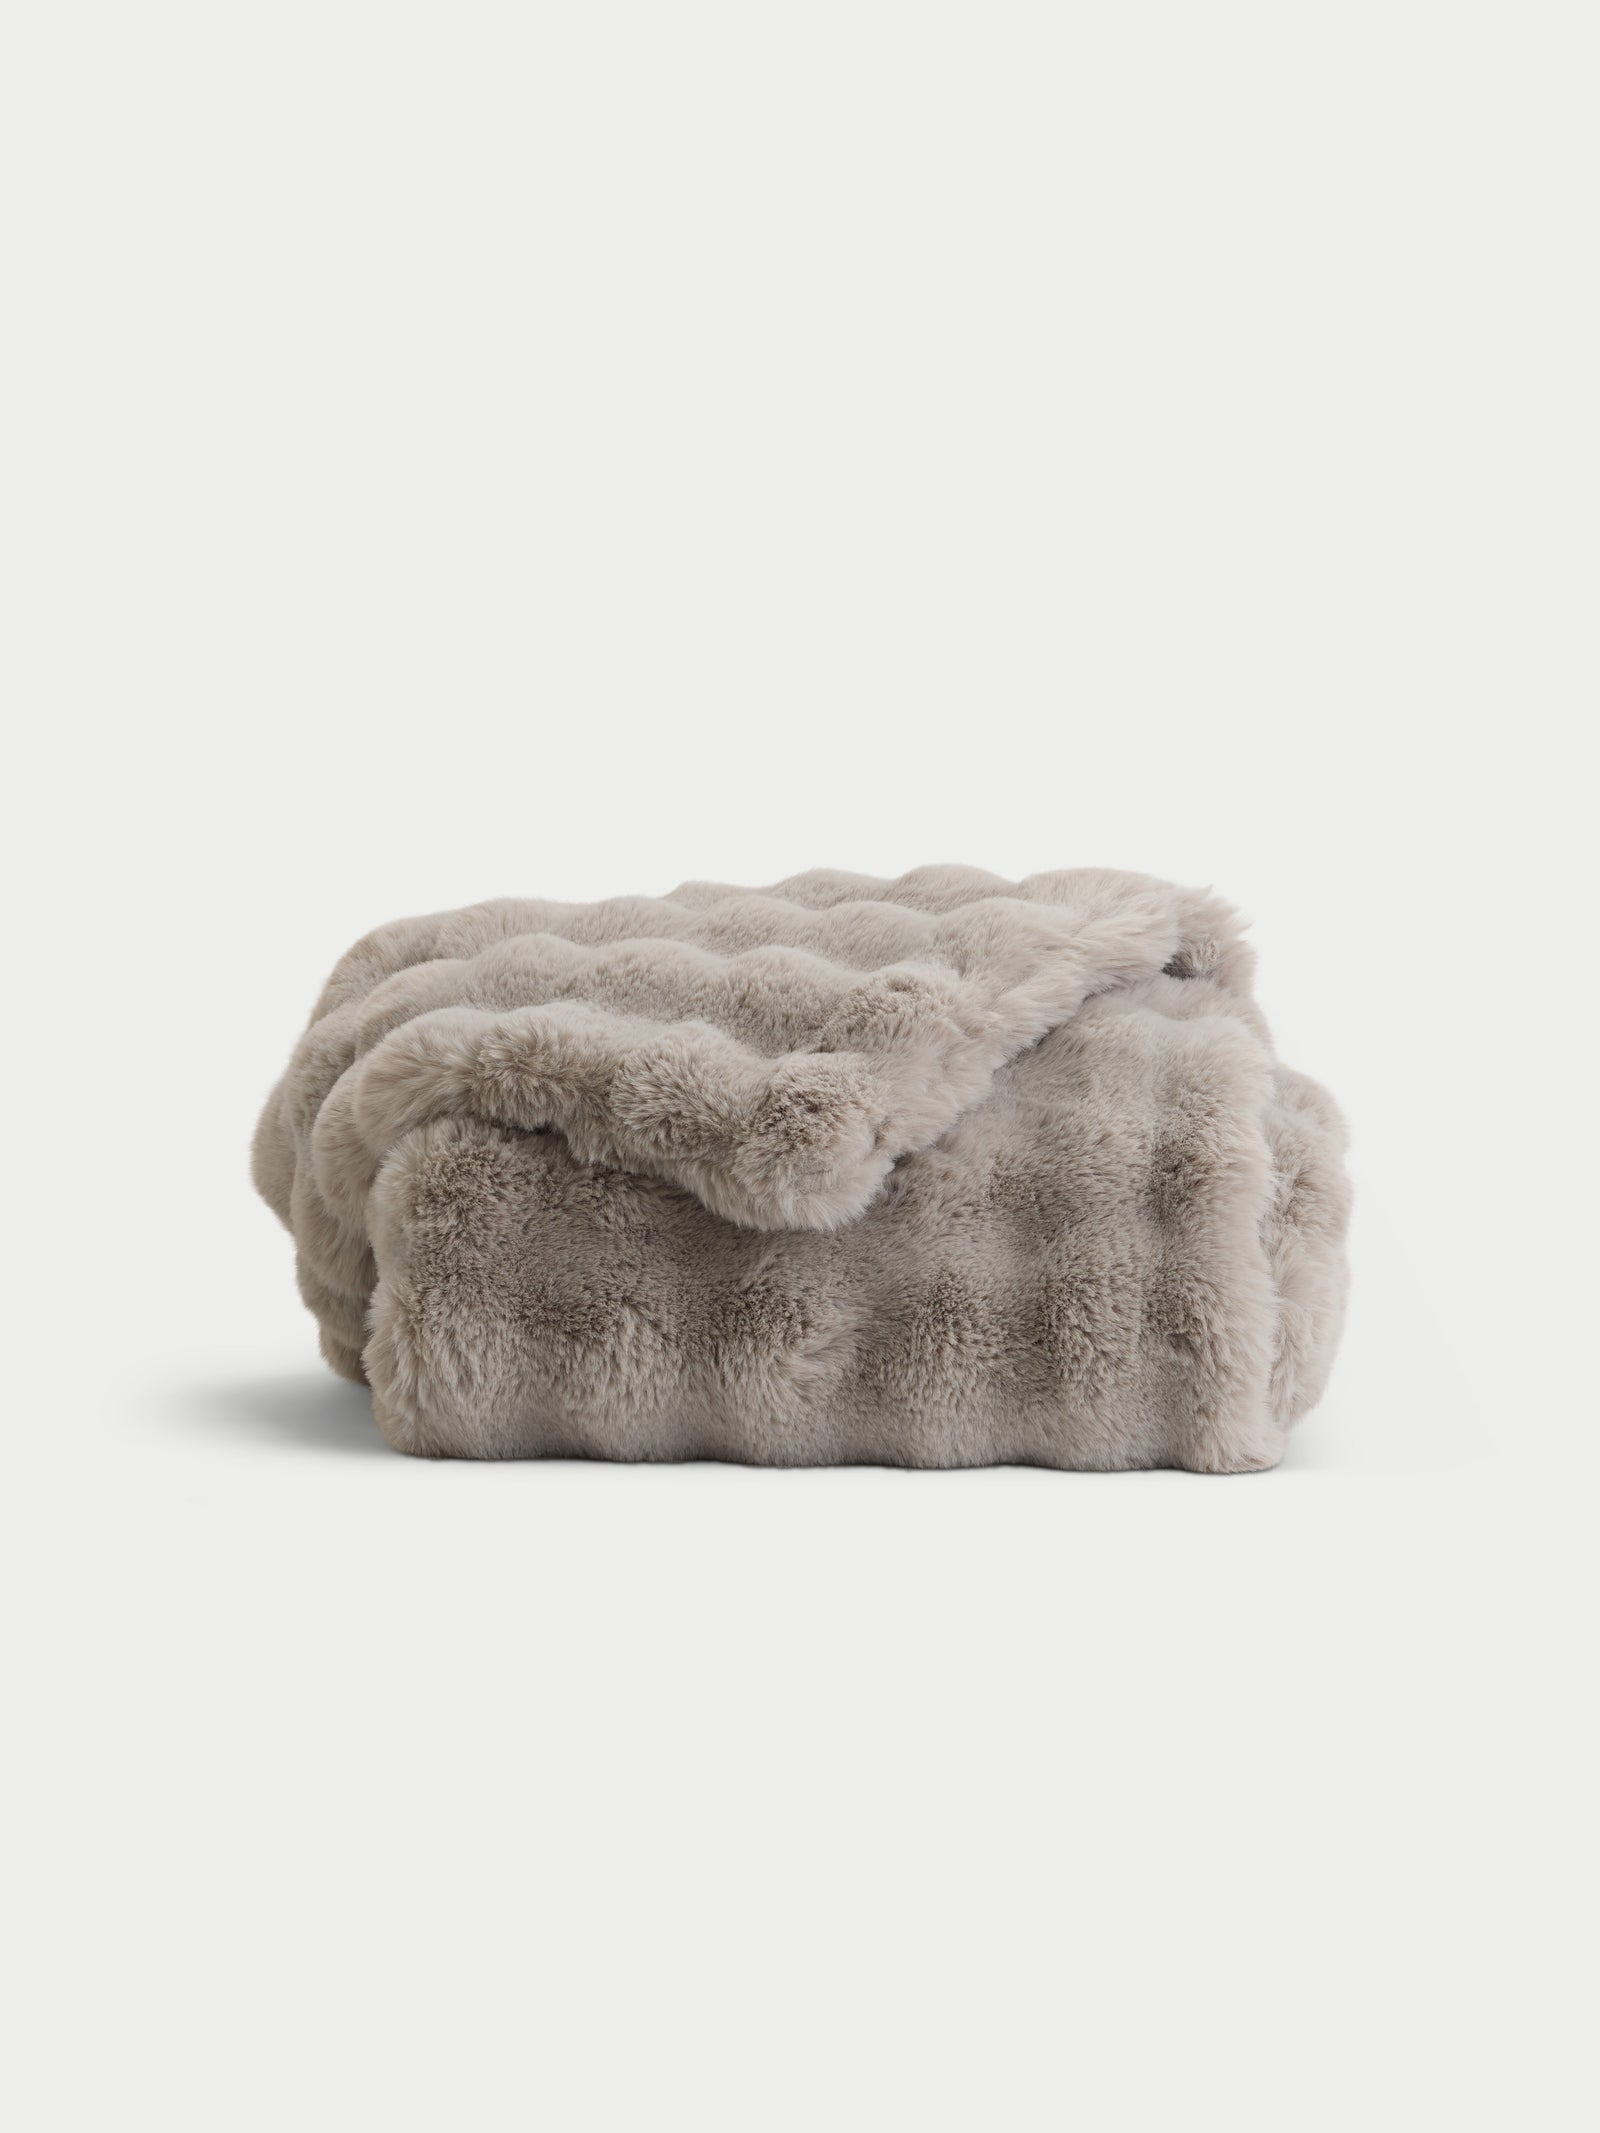 Light grey lush faux fur blanket folded with white background 